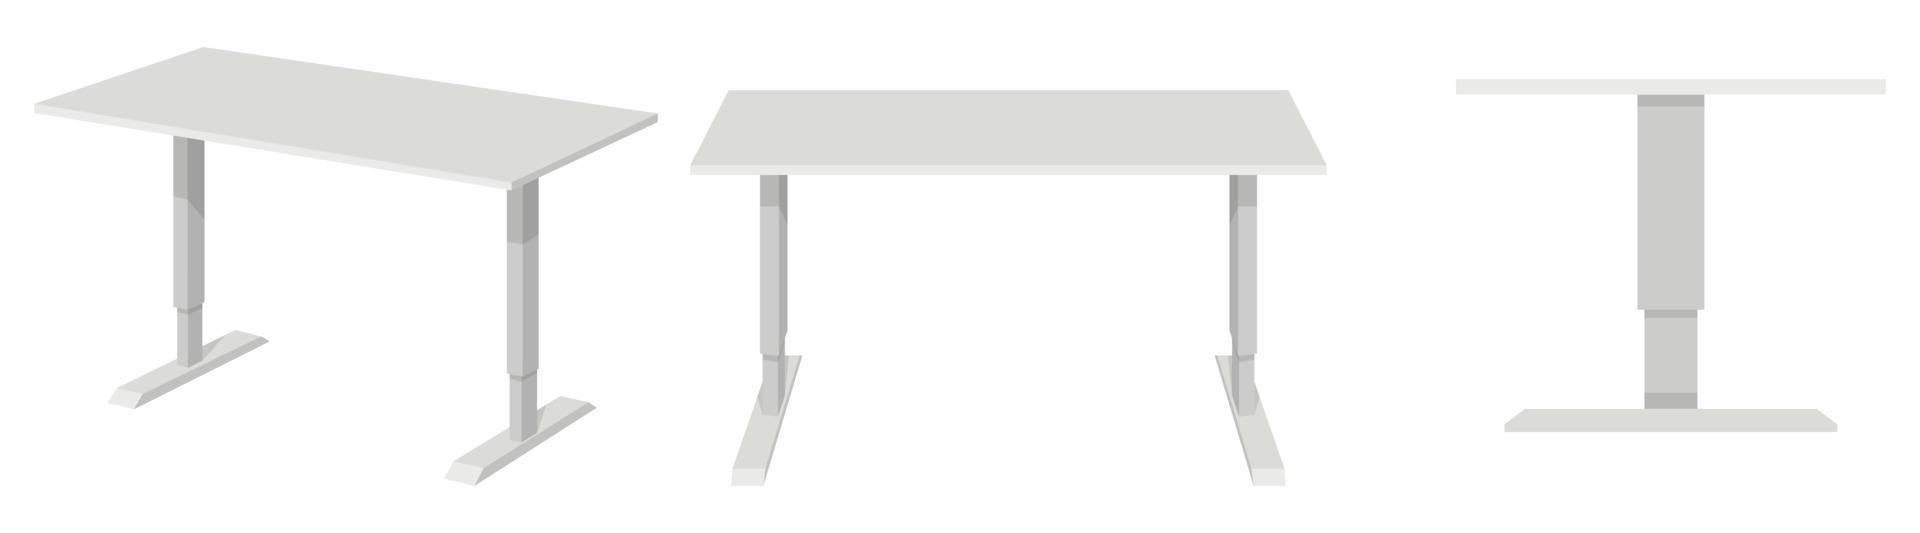 Beautiful cute modern table with different poses and position vector